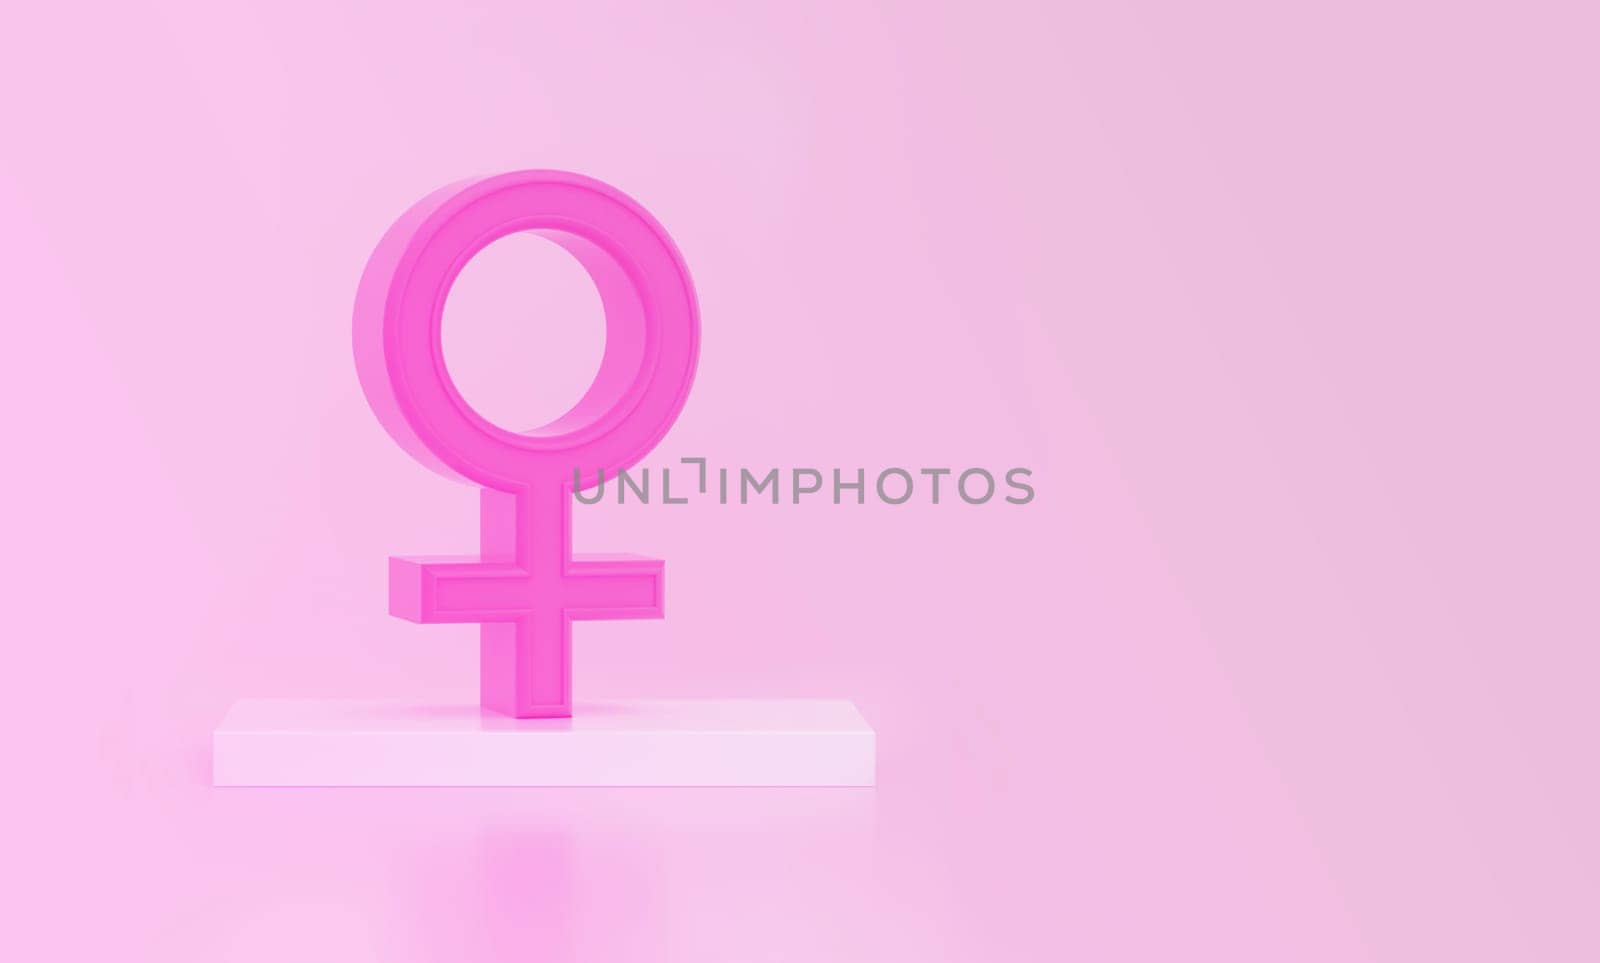 International Women's Day. Female symbol on podium, 3D illustration. Women's equality rights. 8 March celebration for feminism by ImagesRouges